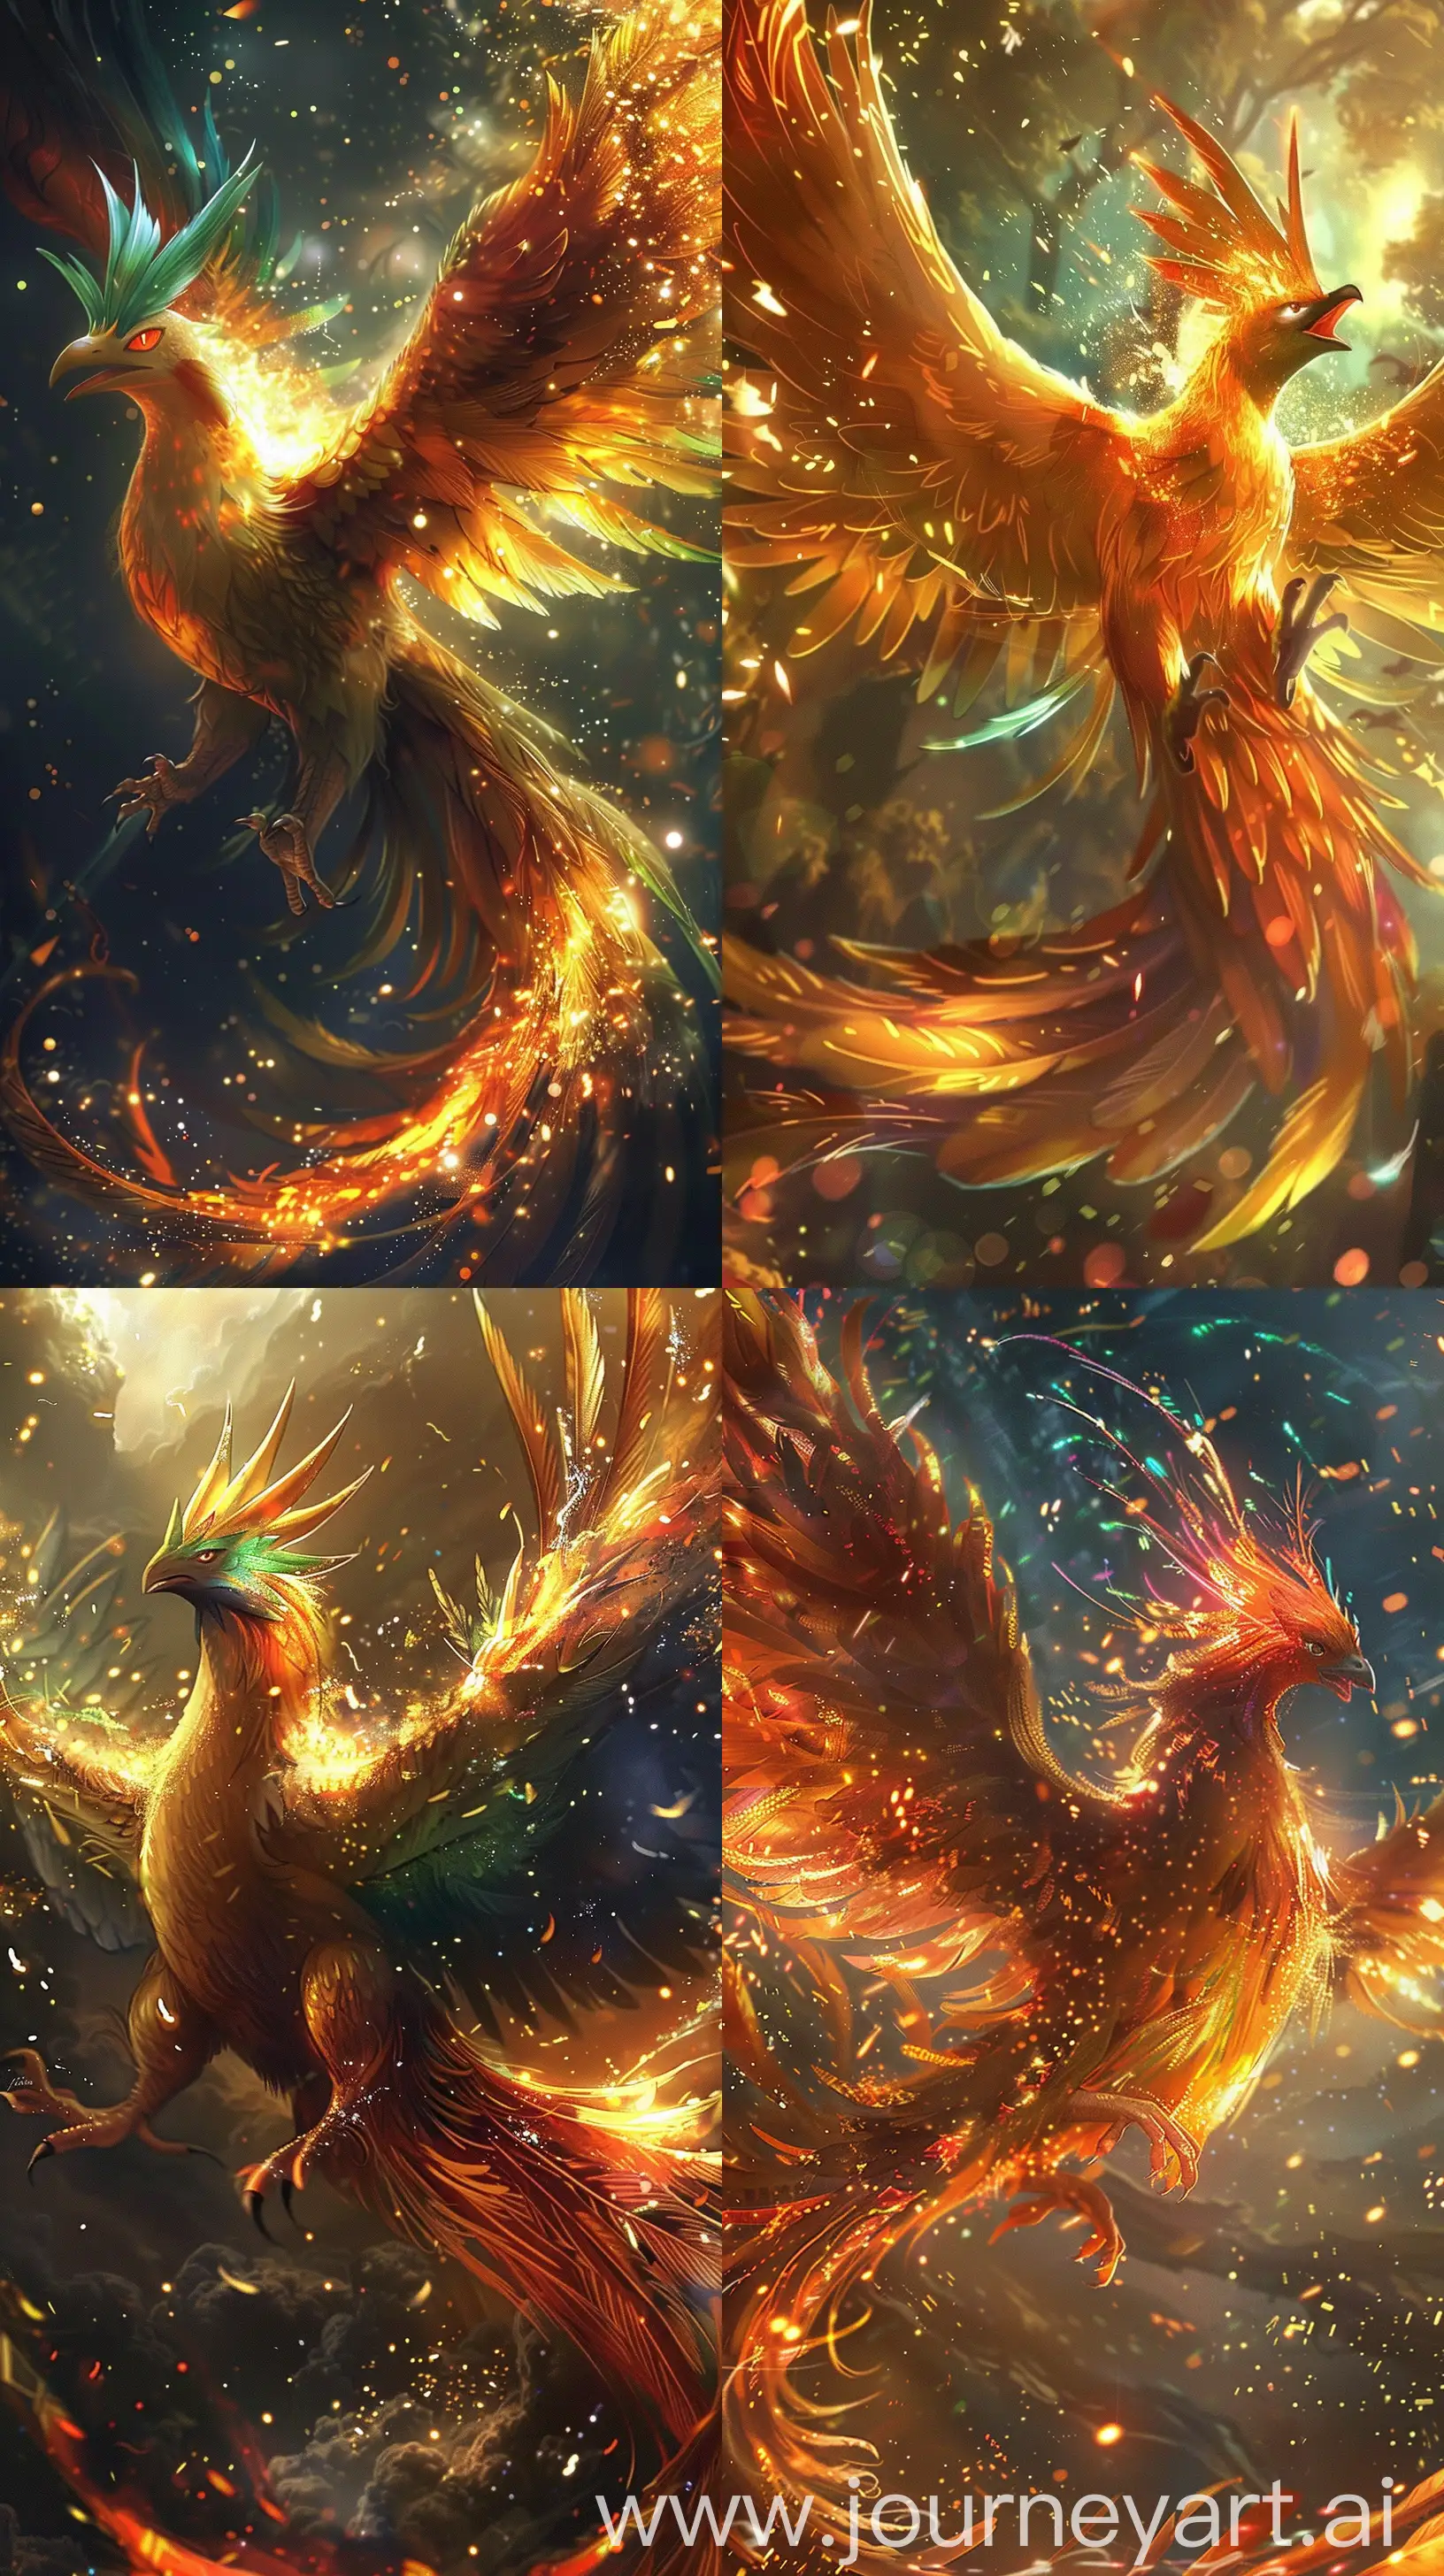 Ho-Oh Pokémon,the legendary fire/flying type Pokémon,surround Ho Oh with a radiant,golden aura,and add sparkling,glittering effects around it's wings and feathers,awe inspiring atmosphere,beautiful --ar 9:16